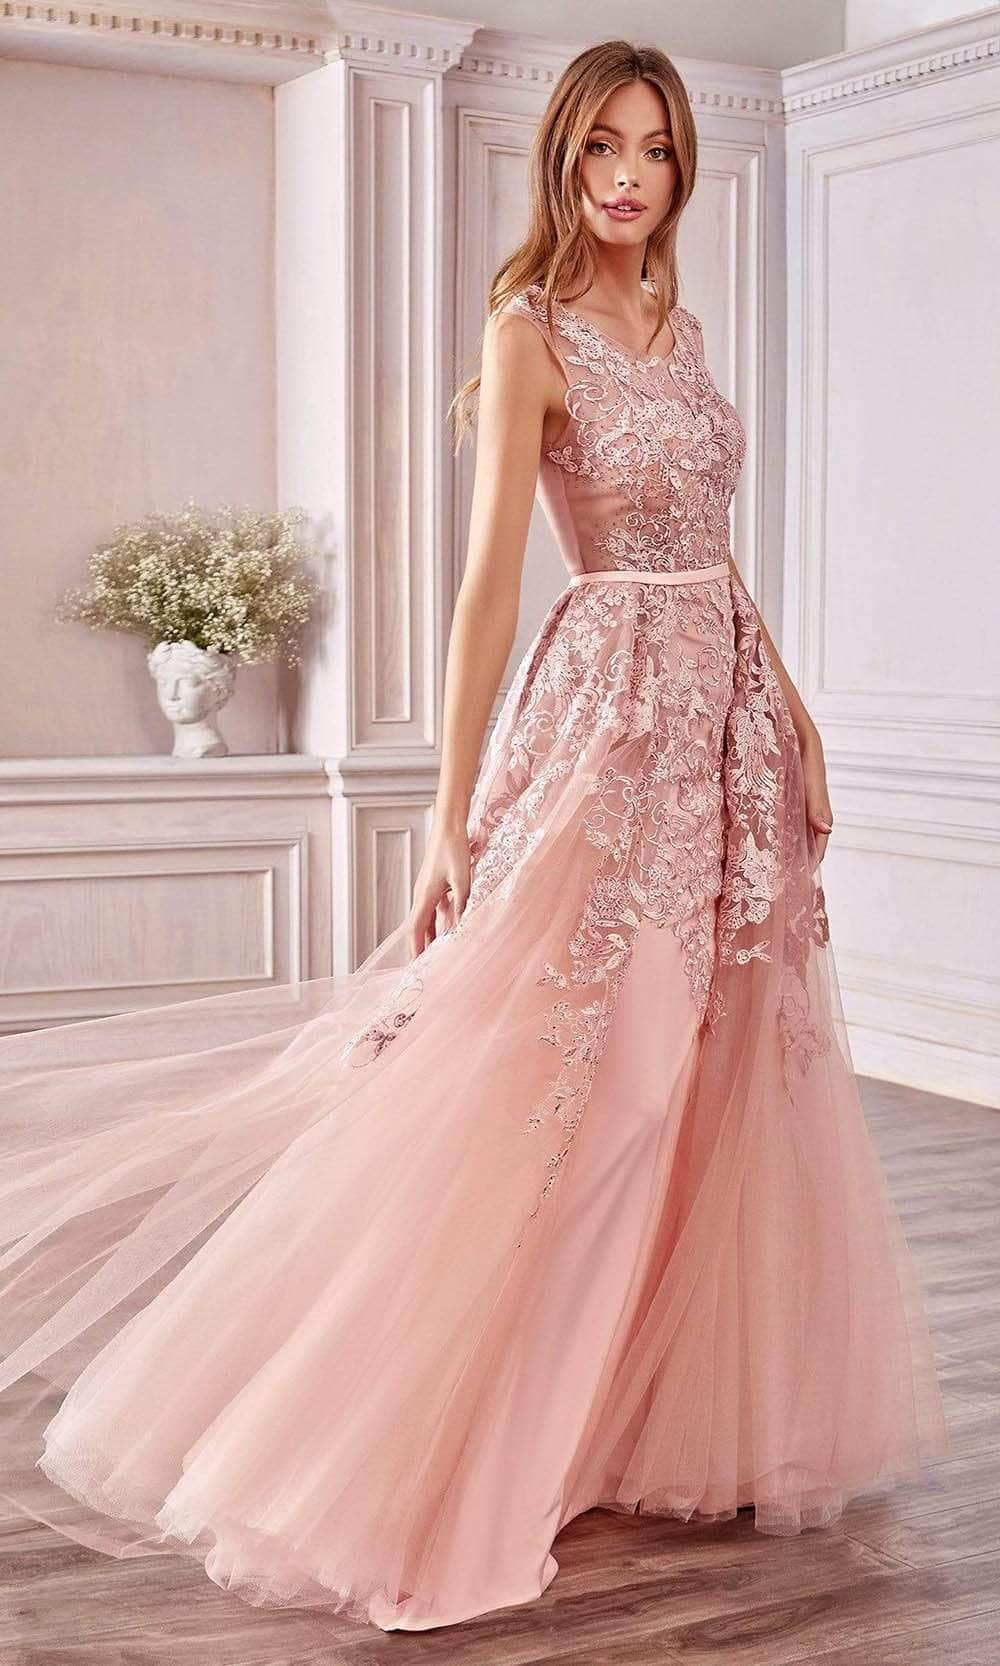 Andrea and Leo A0257 - Embroidered Evening Gown Mother of the Bride Dresses 2 /Dusty Rose